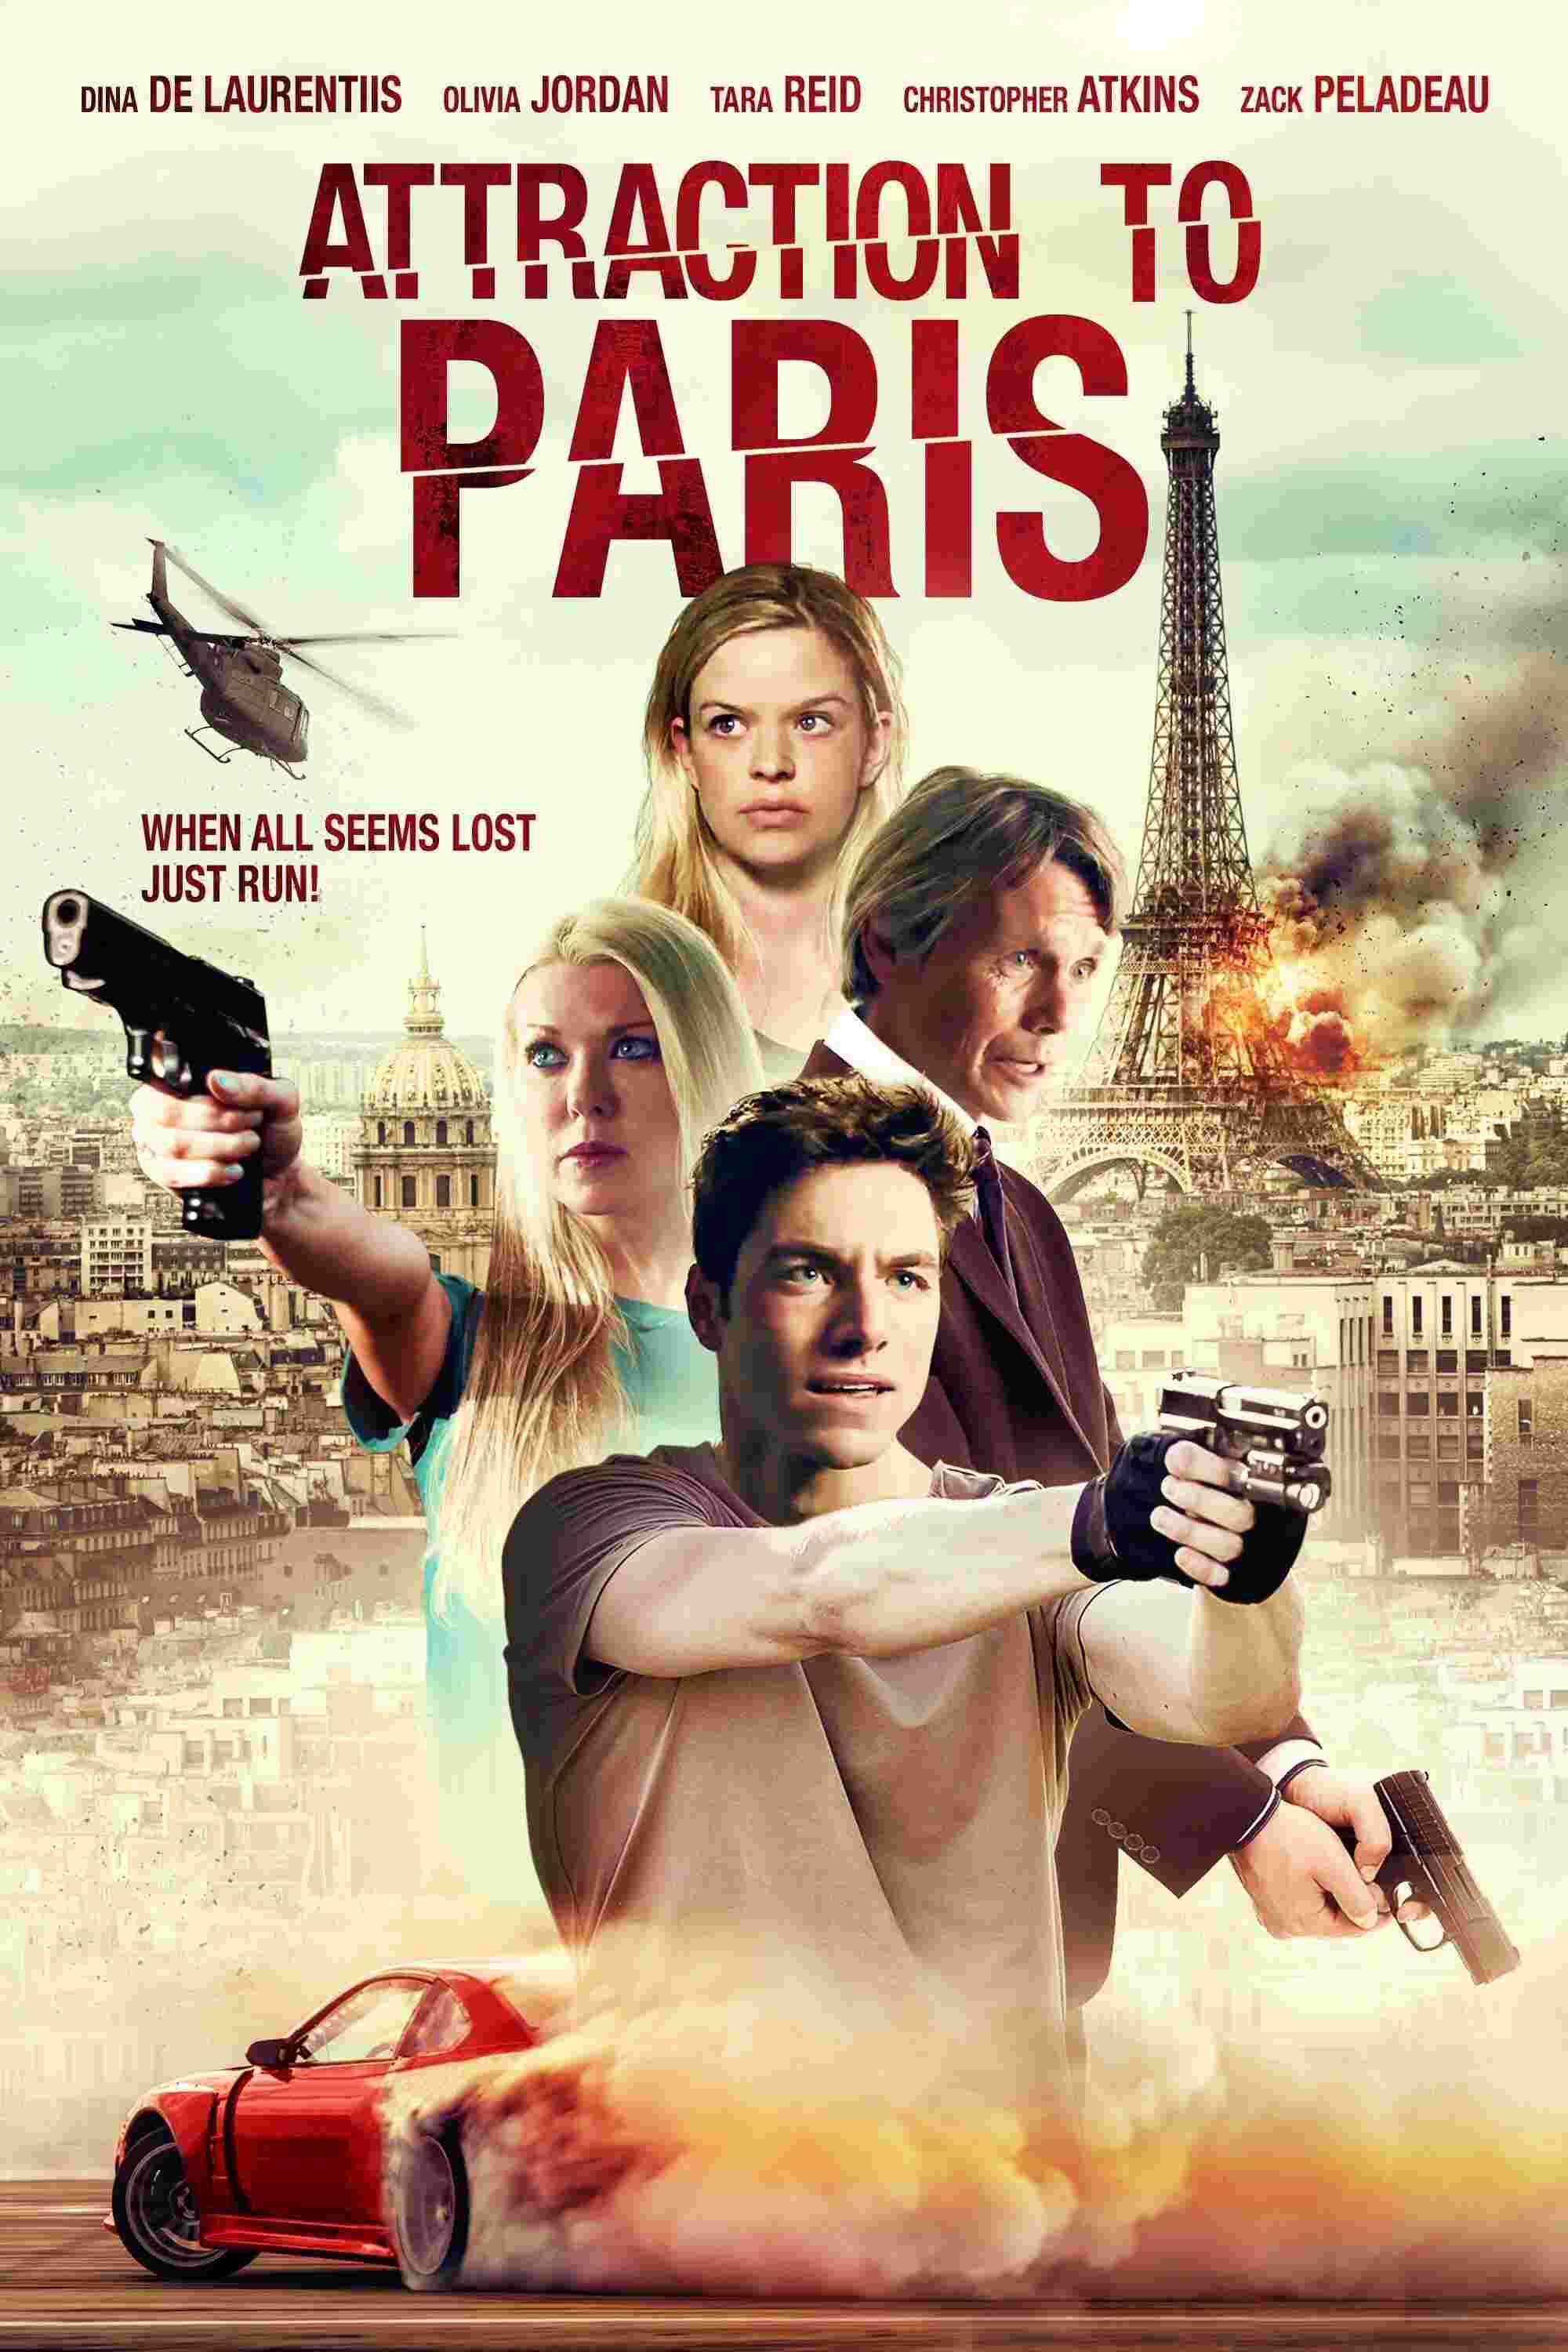 Attraction to Paris (2021) Christopher Atkins